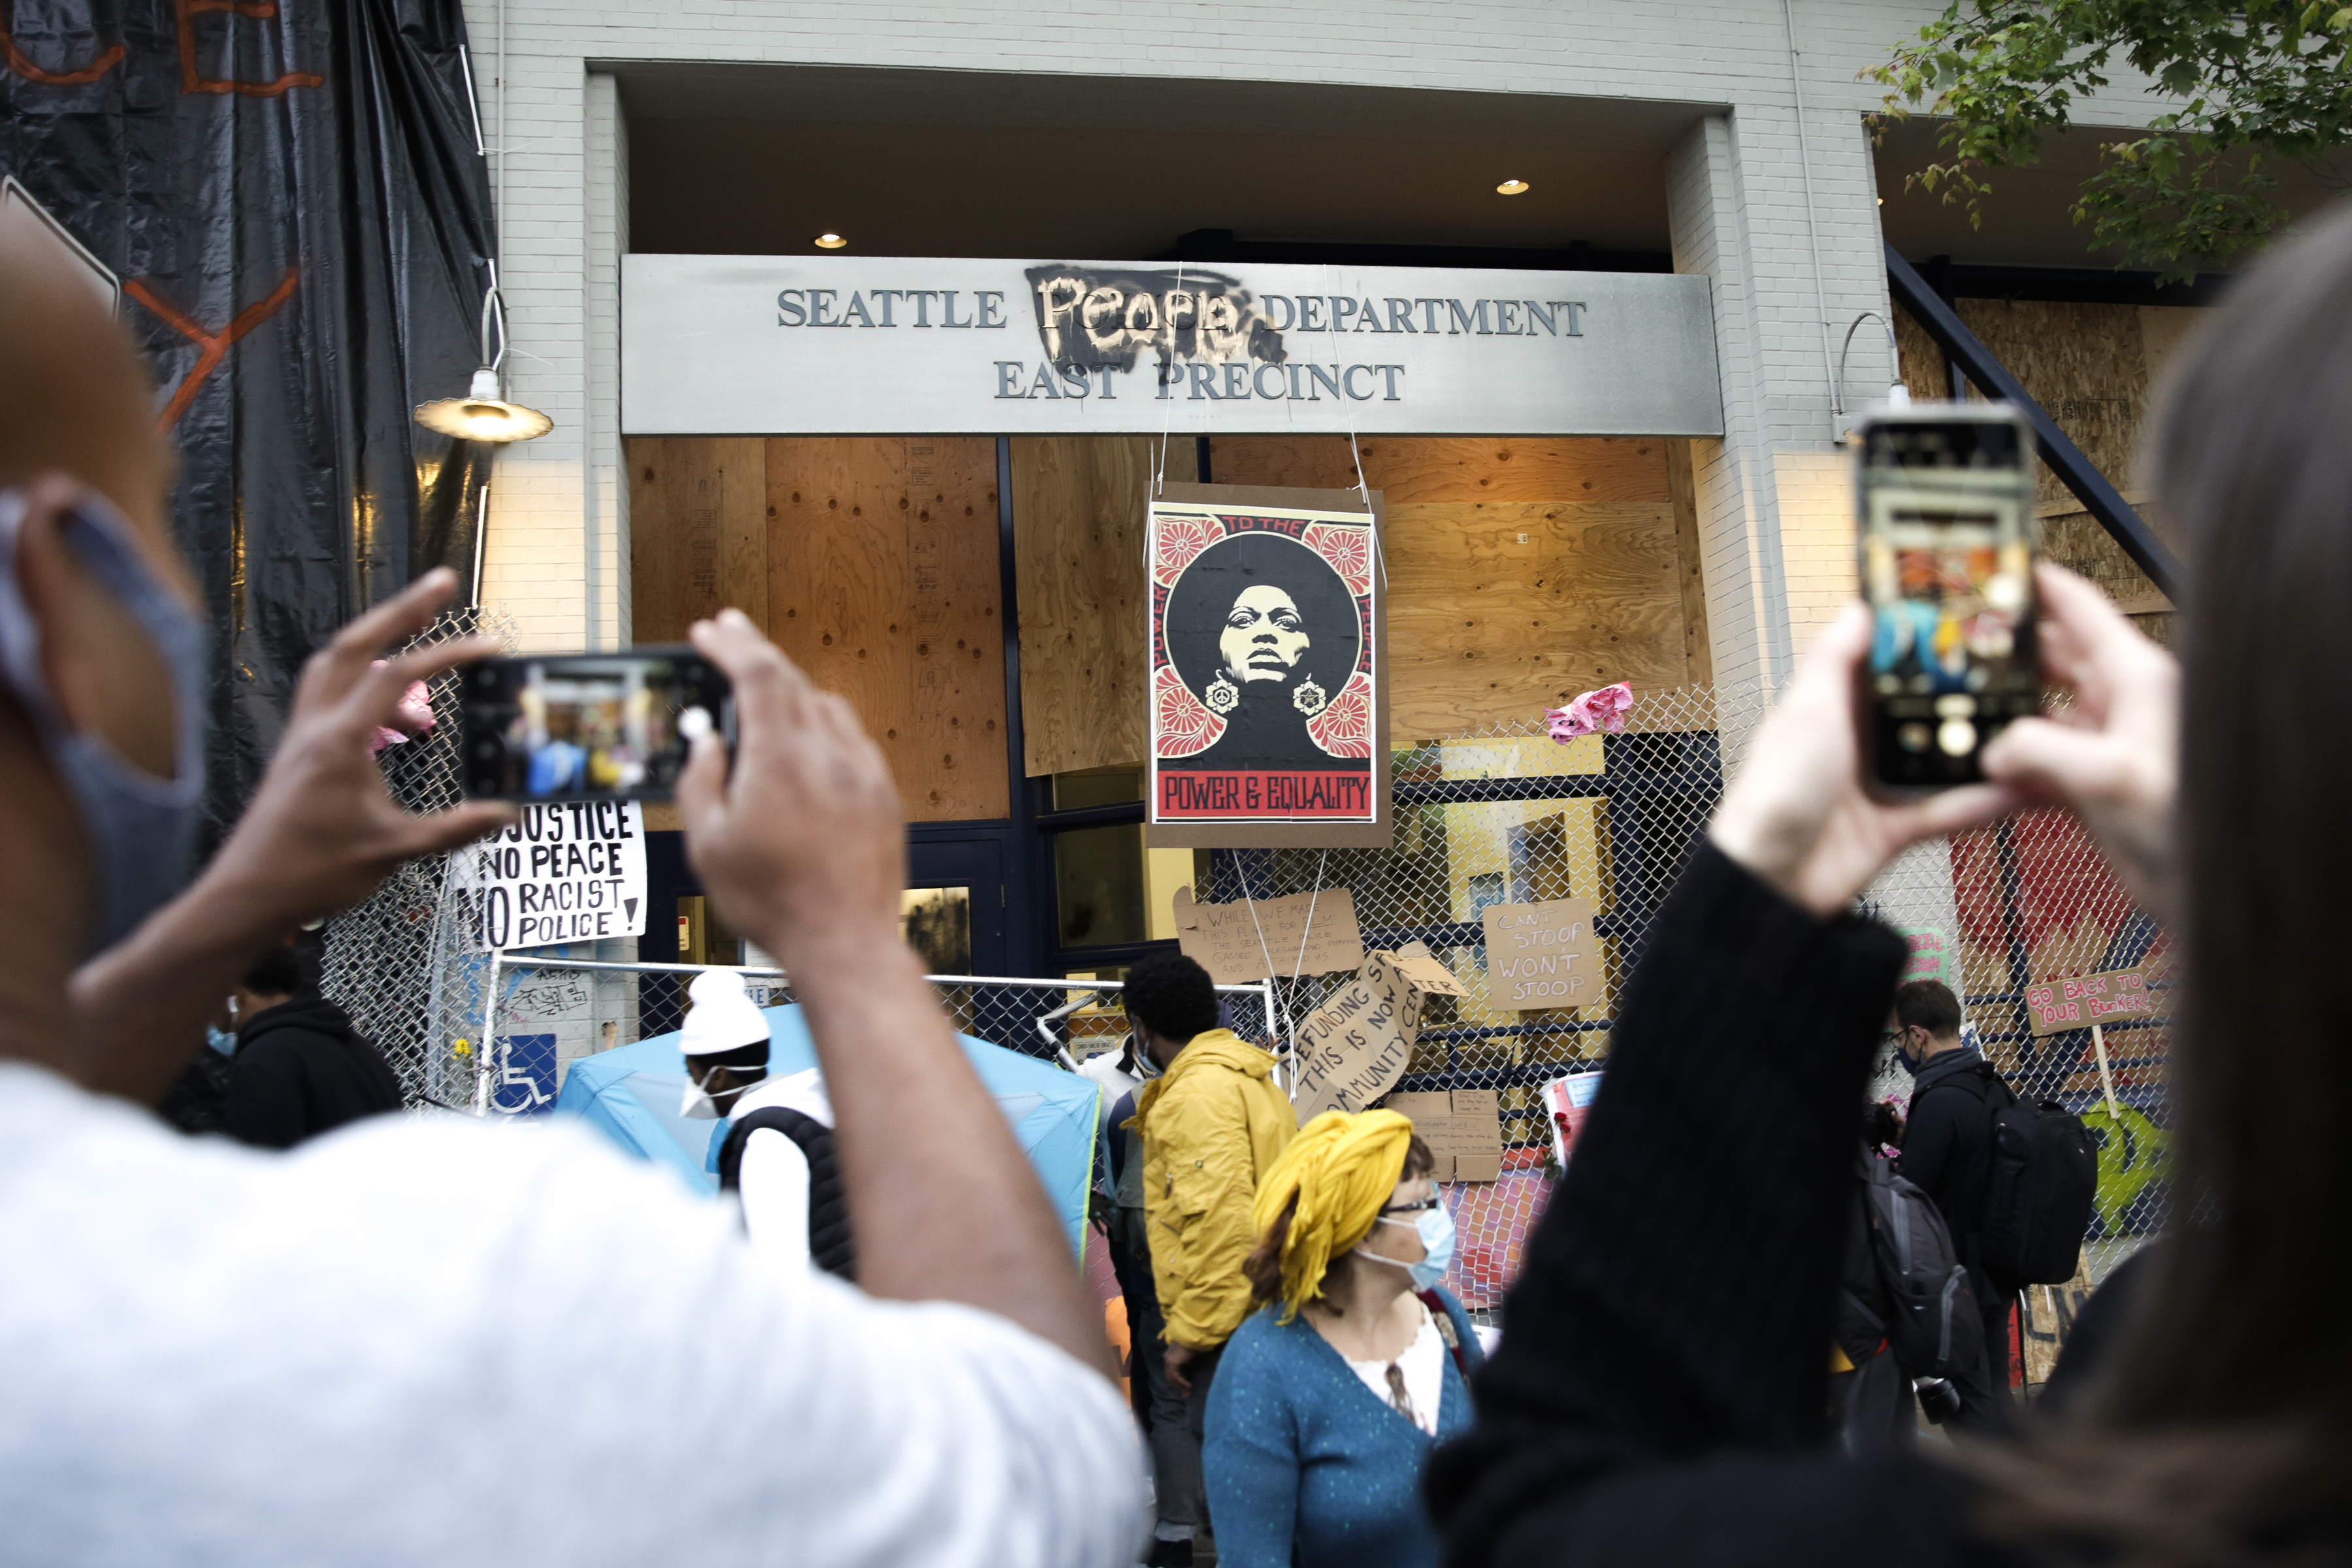 People photograph an image of activist Angela Davis displayed above the entrance to the Seattle Police Department's East Precinct, vacated June 8, and now surrounded by streets reopened to pedestrians forming an area named the Capitol Hill Autonomous Zone (CHAZ) in Seattle, Washington on June 12, 2020. (Photo: Jason Redmond/AFP via Getty Images)